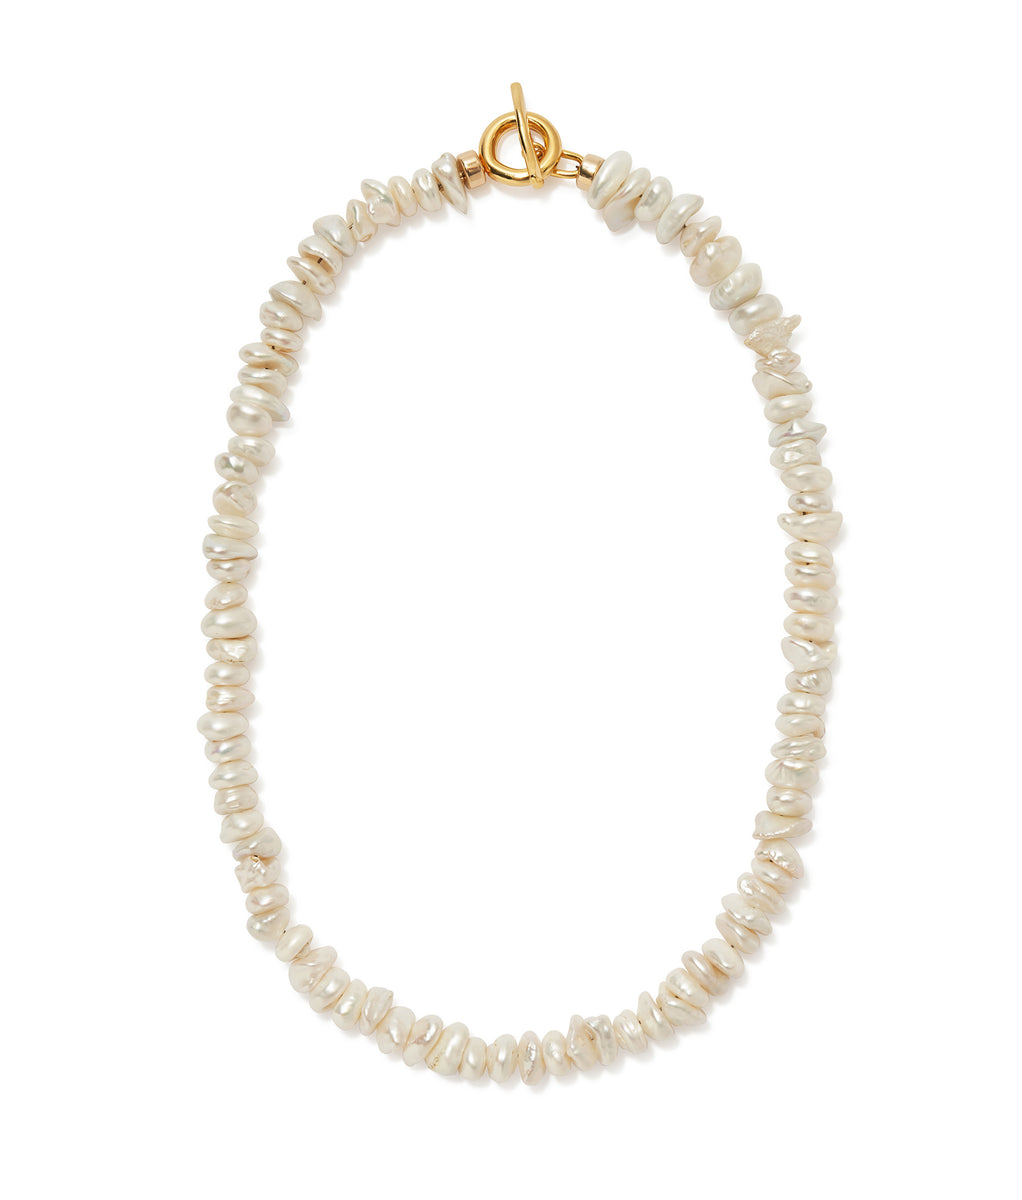 Mood Necklace in Pearl | Lizzie Fortunato